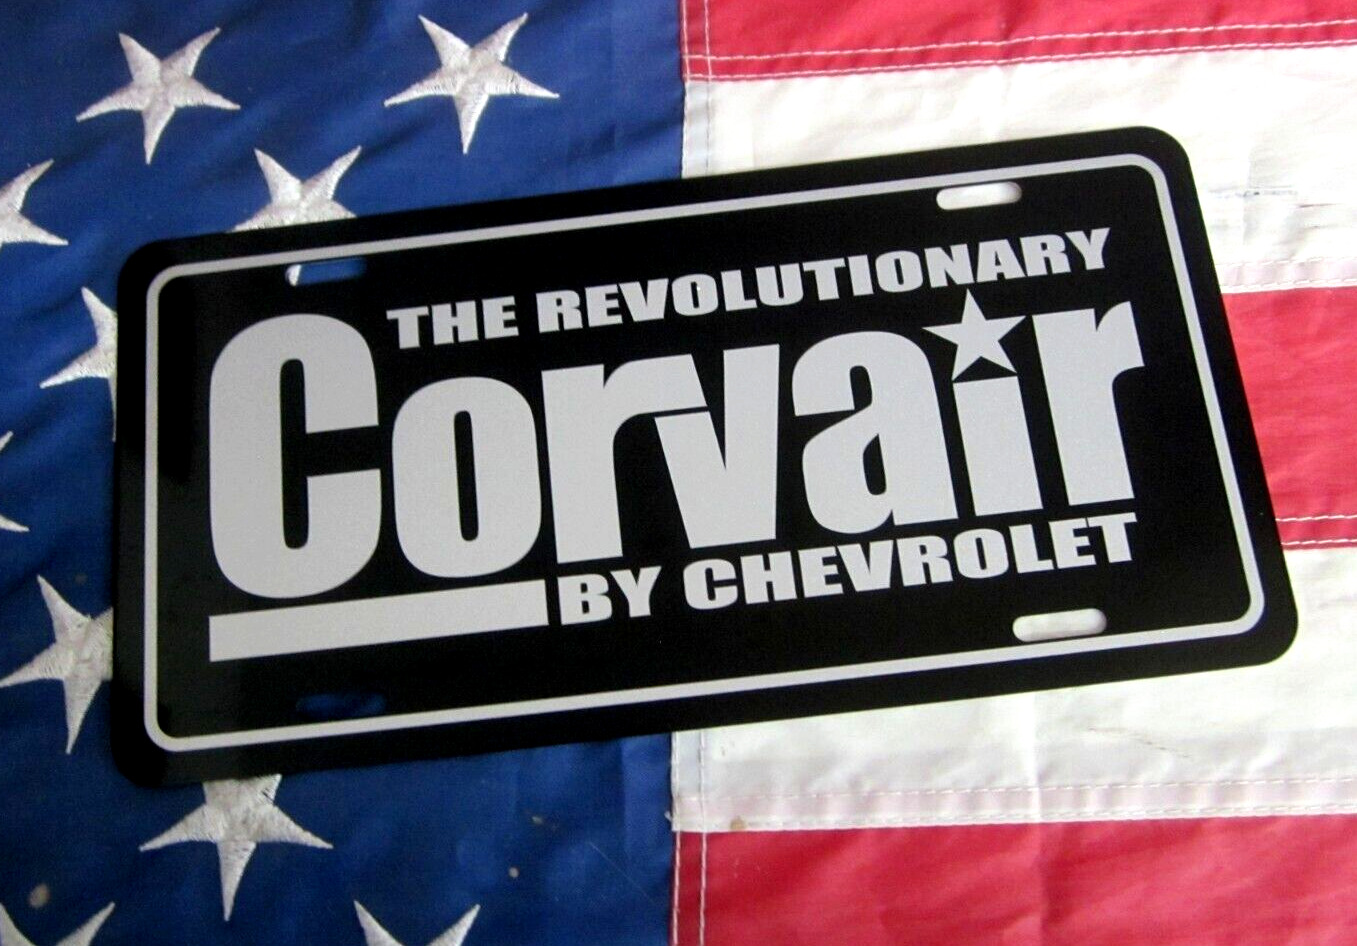 Chevy Corvair license plate tag 1960 1961 1962 1963 1964 1965 1966 1967 1968 